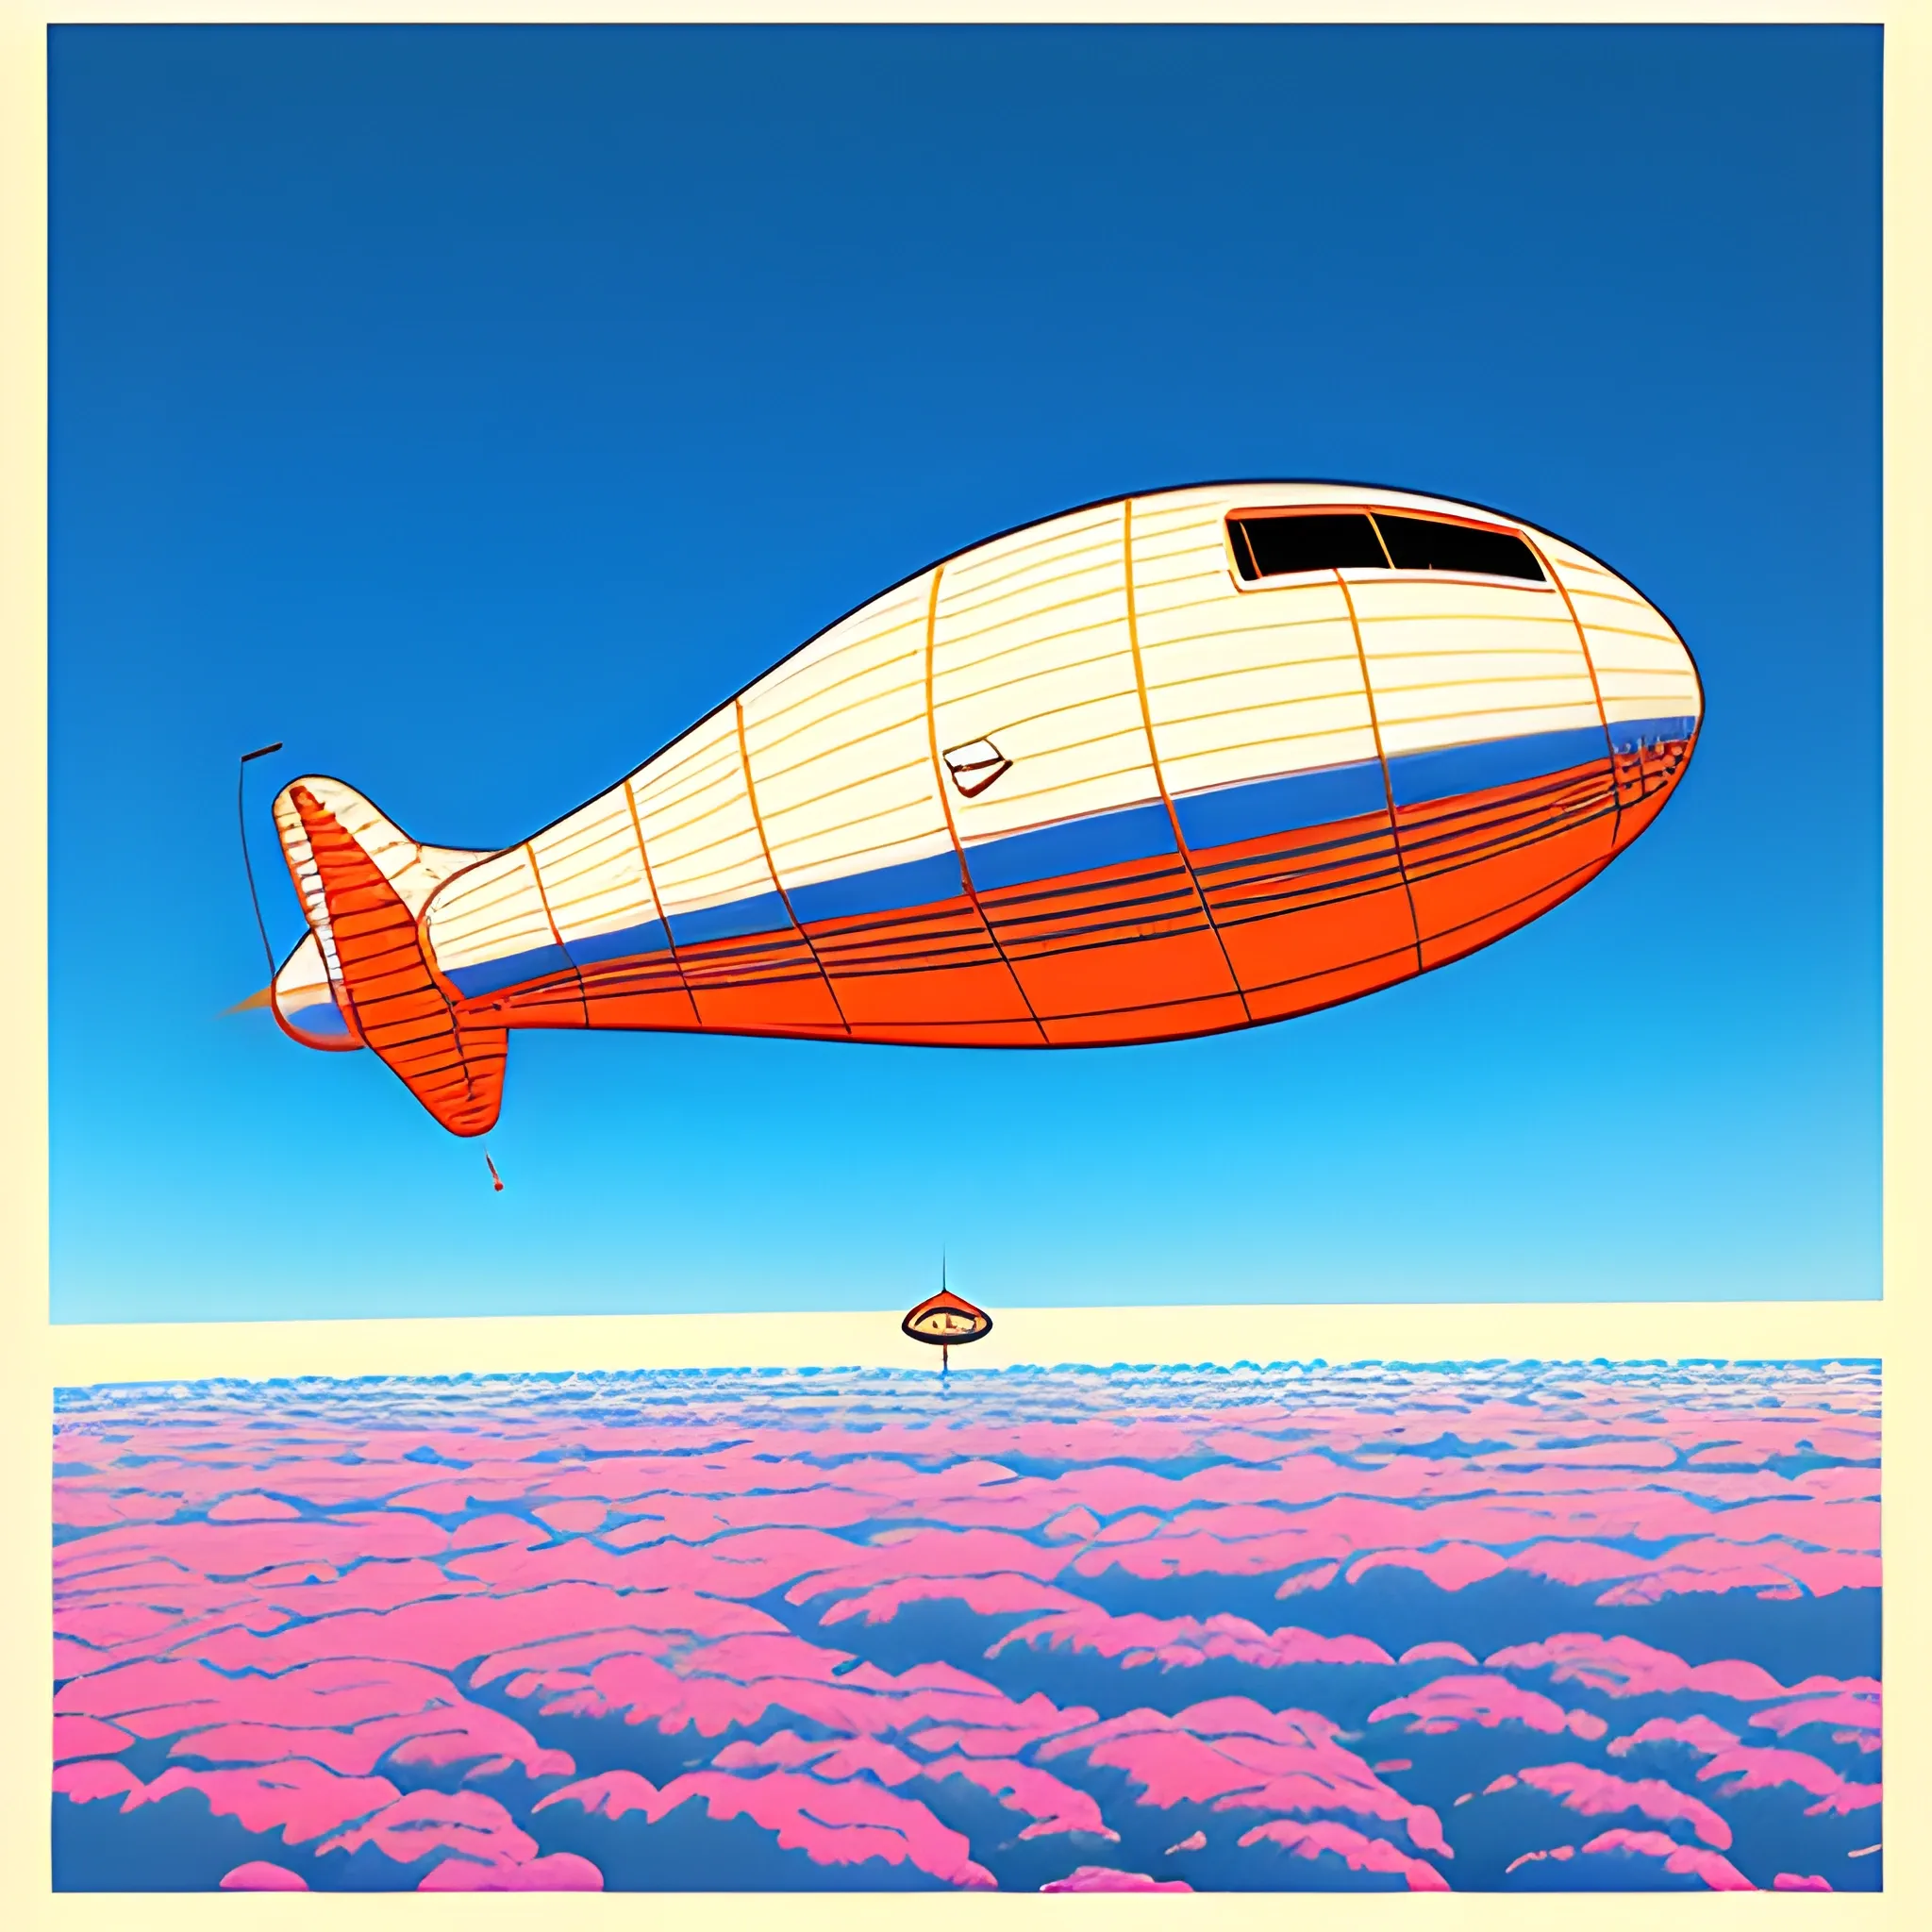 small 1960's blimp with pilot, flying above the clouds, drawn in jean giraud's art style, side view, with room for a pilot